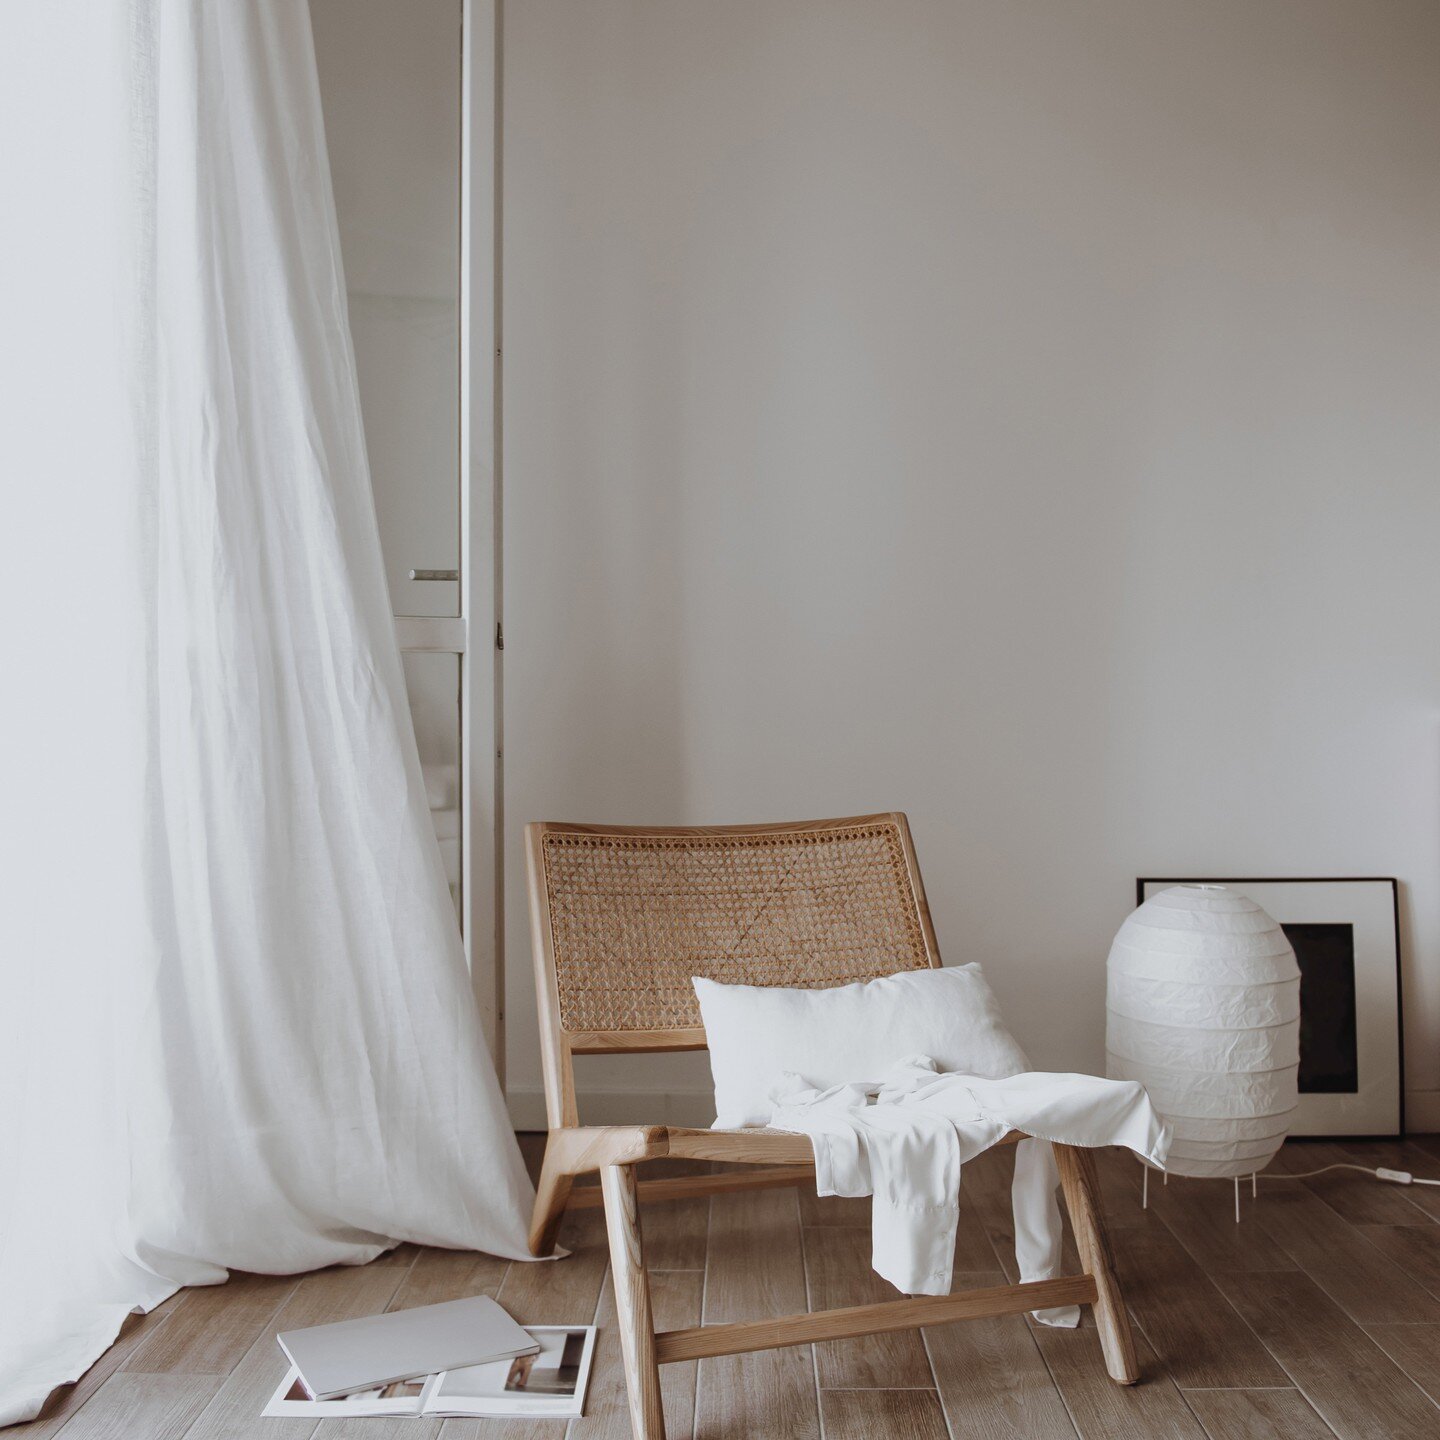 Moving soon? A neutral vibe is what your home needs. Our design team gathered up their favorite suggestions for staging your home with little to no investment required. 

Link in bio!